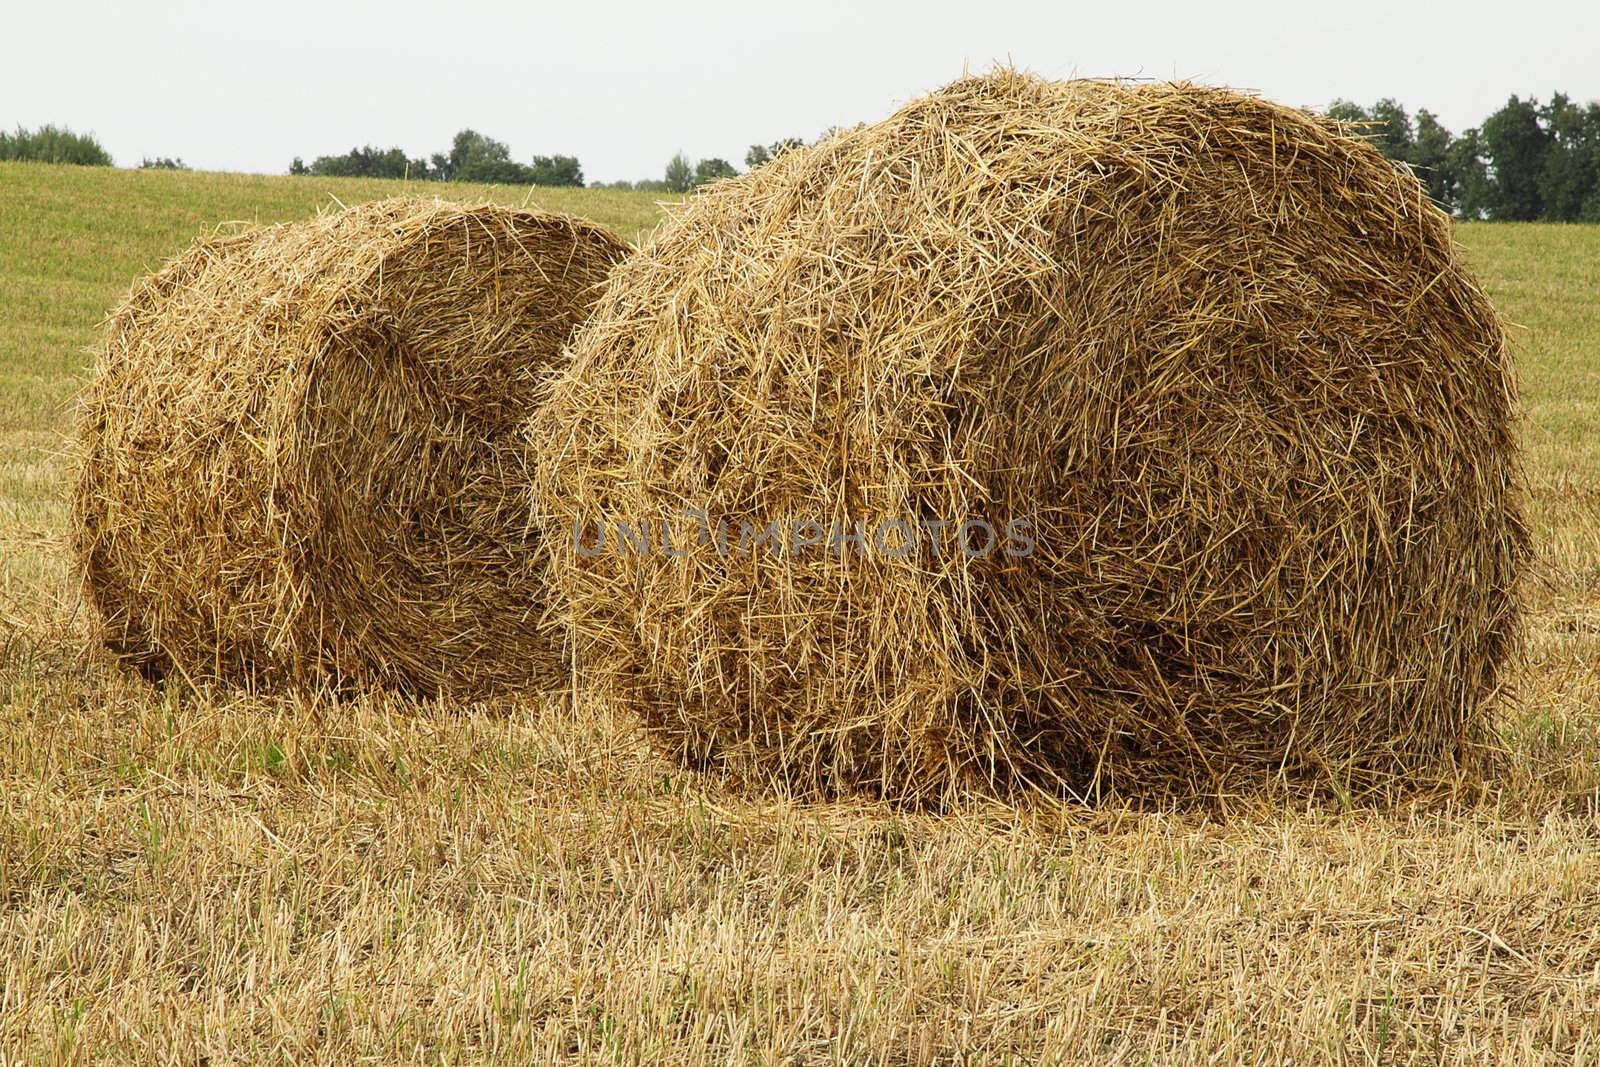 Two haystacks in the field